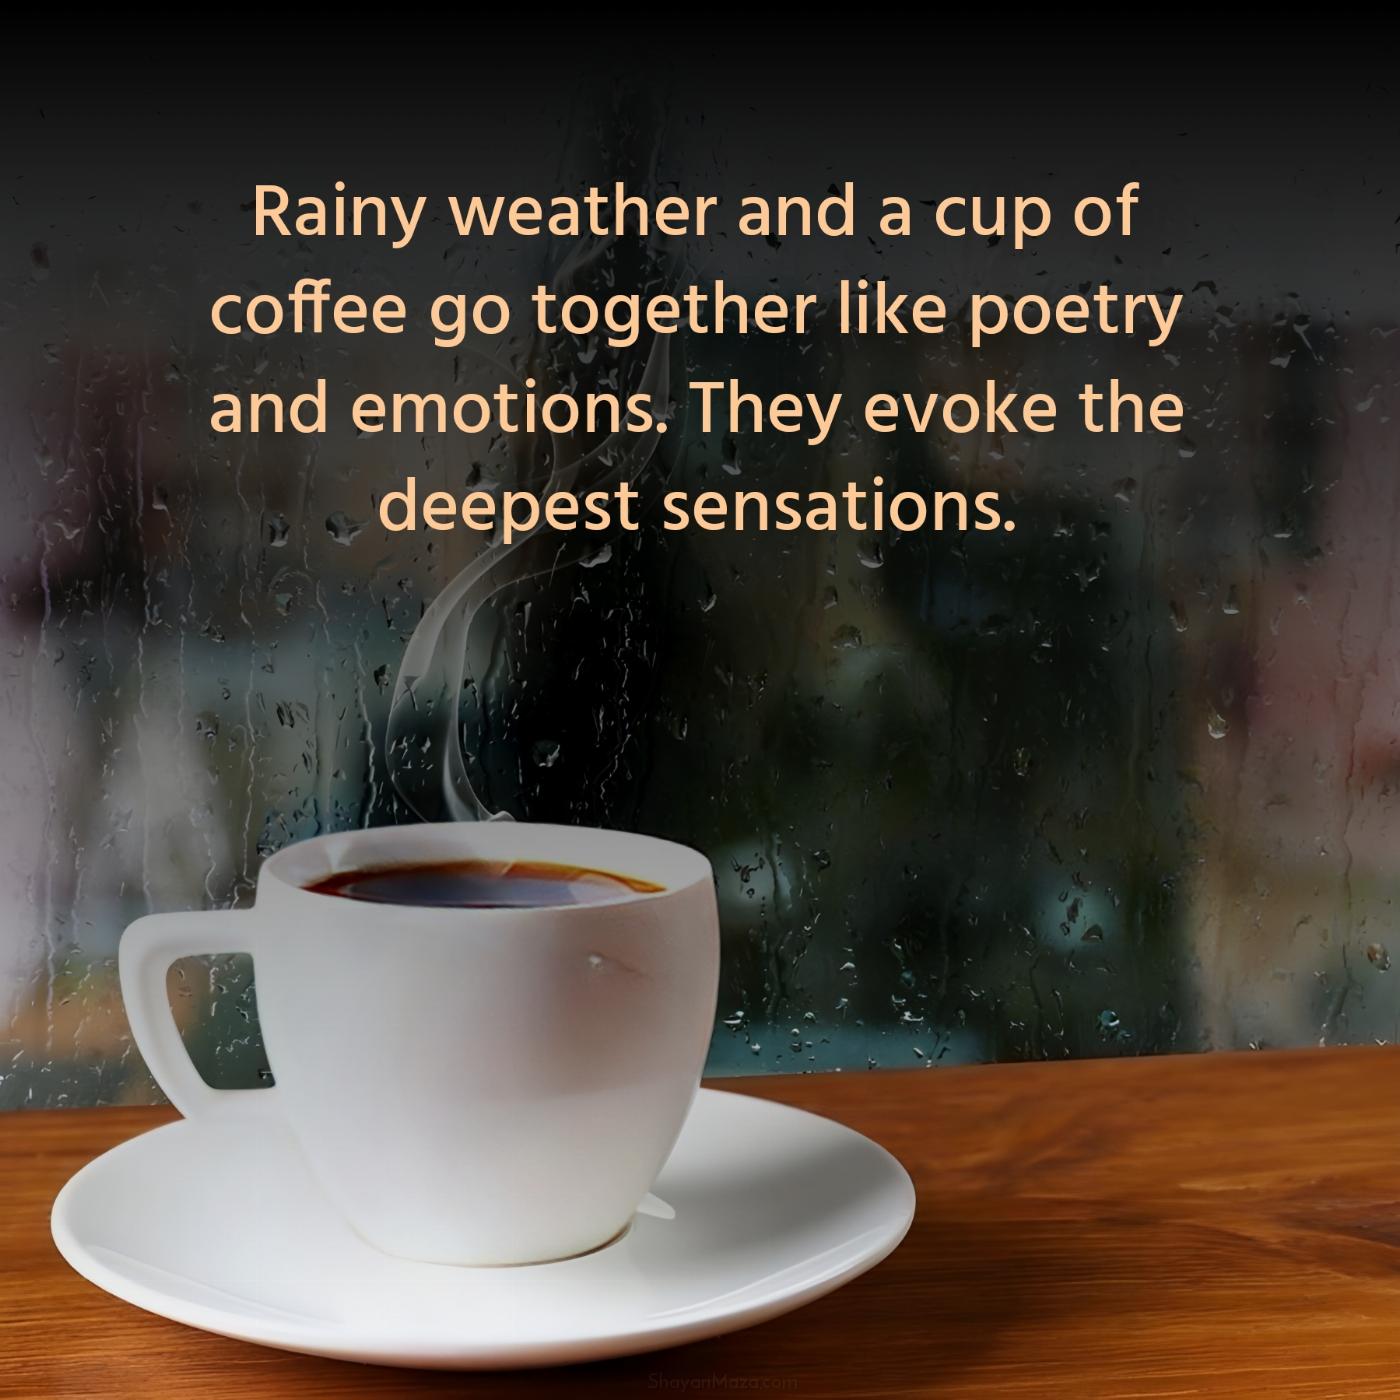 Rainy weather and a cup of coffee go together like poetry and emotions